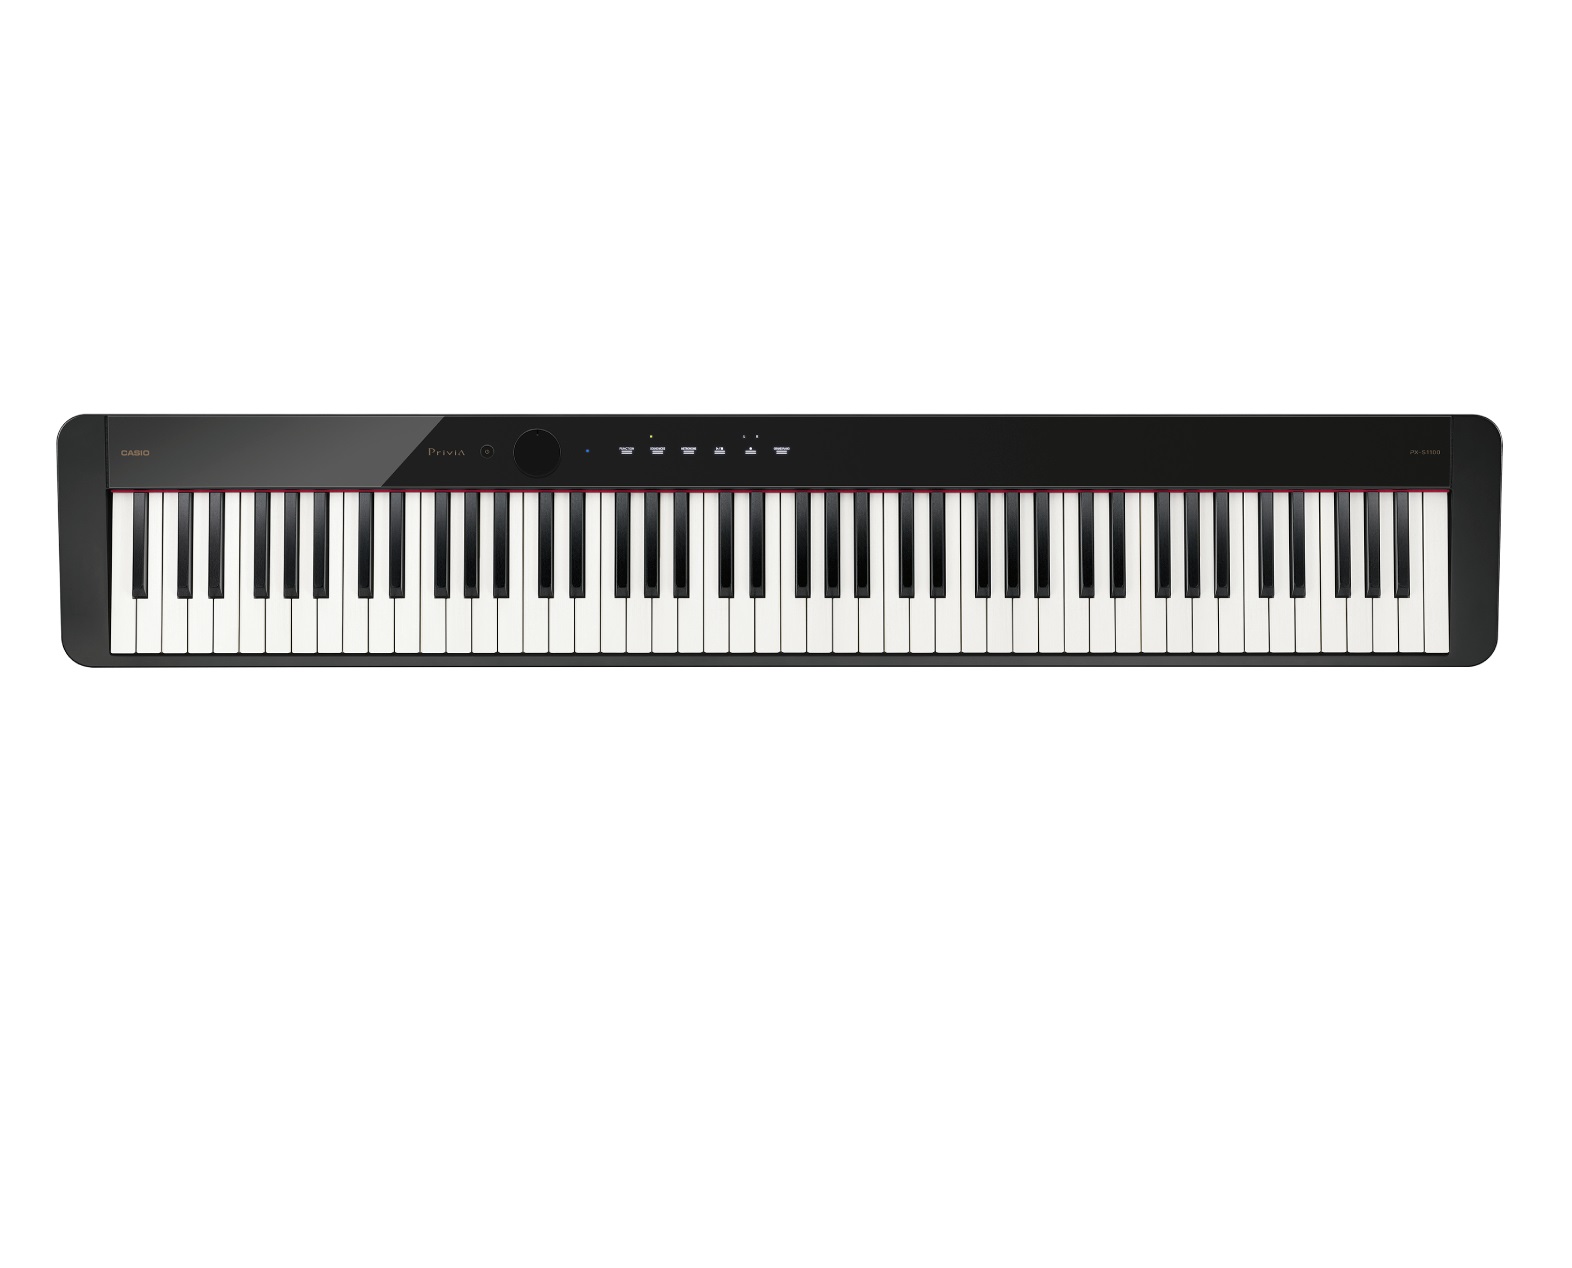 Piano et claviers: Clavier PIANO Casio PX-S1100 - 88 touches